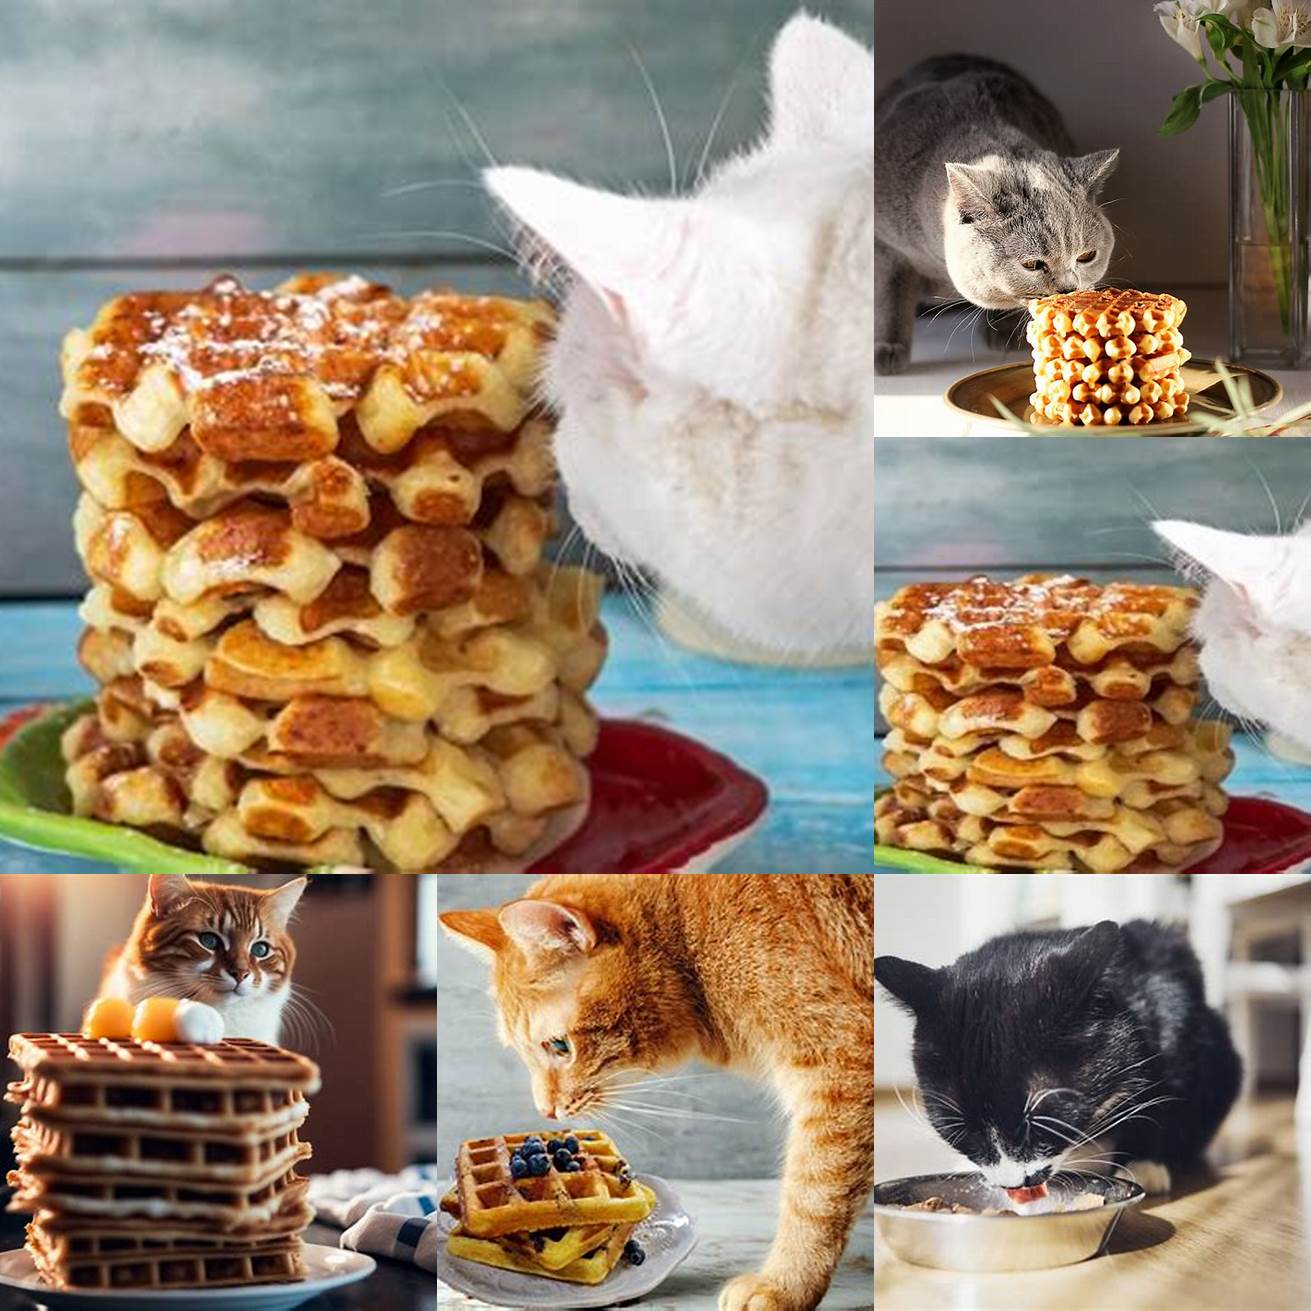 Feeding your cat waffles can lead to picky eating habits